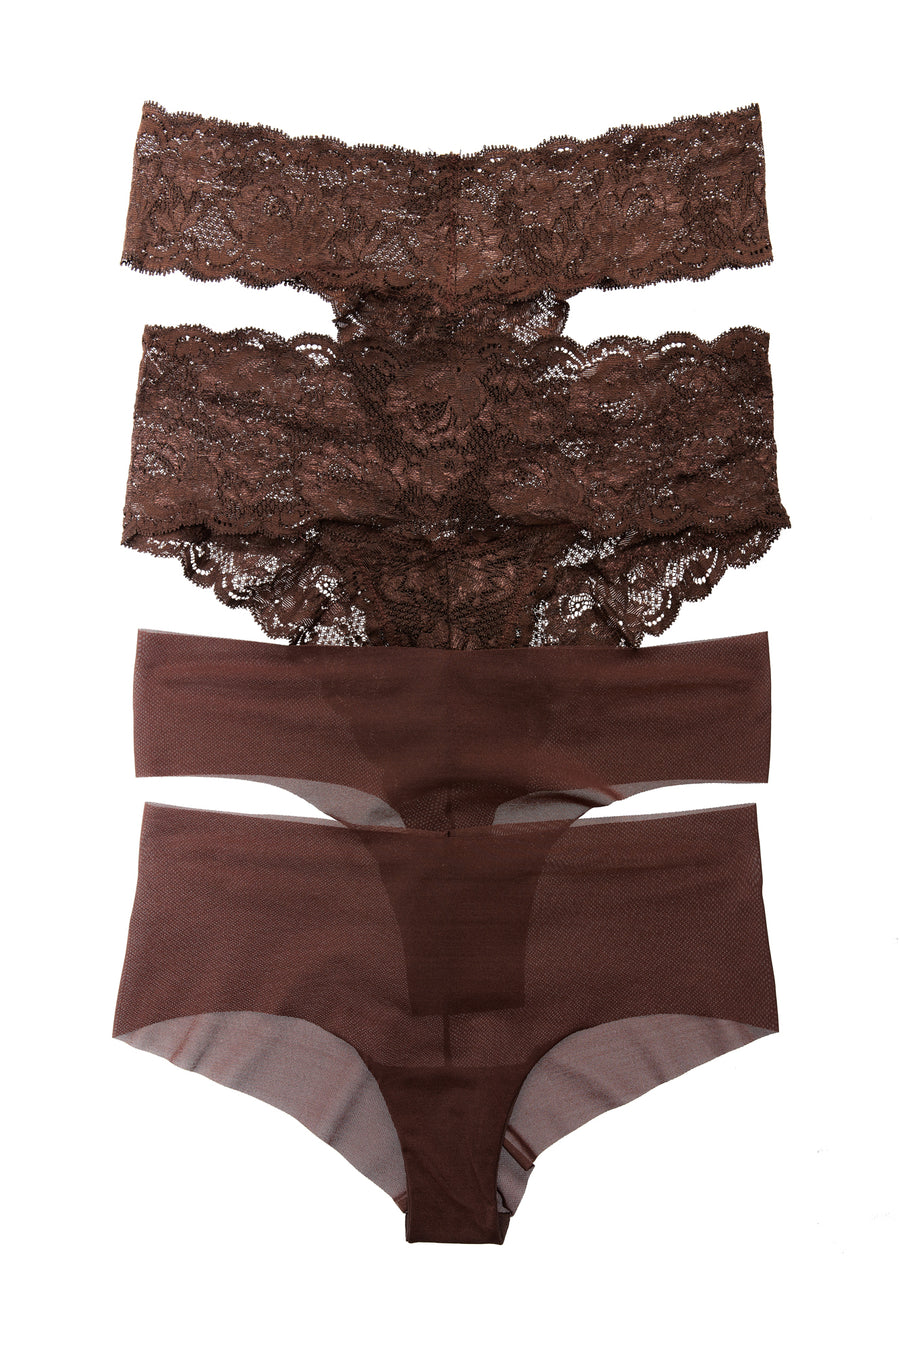 Marrone Culotte - Never Say Never Aire Box Of Chocolate 4 Square Pack